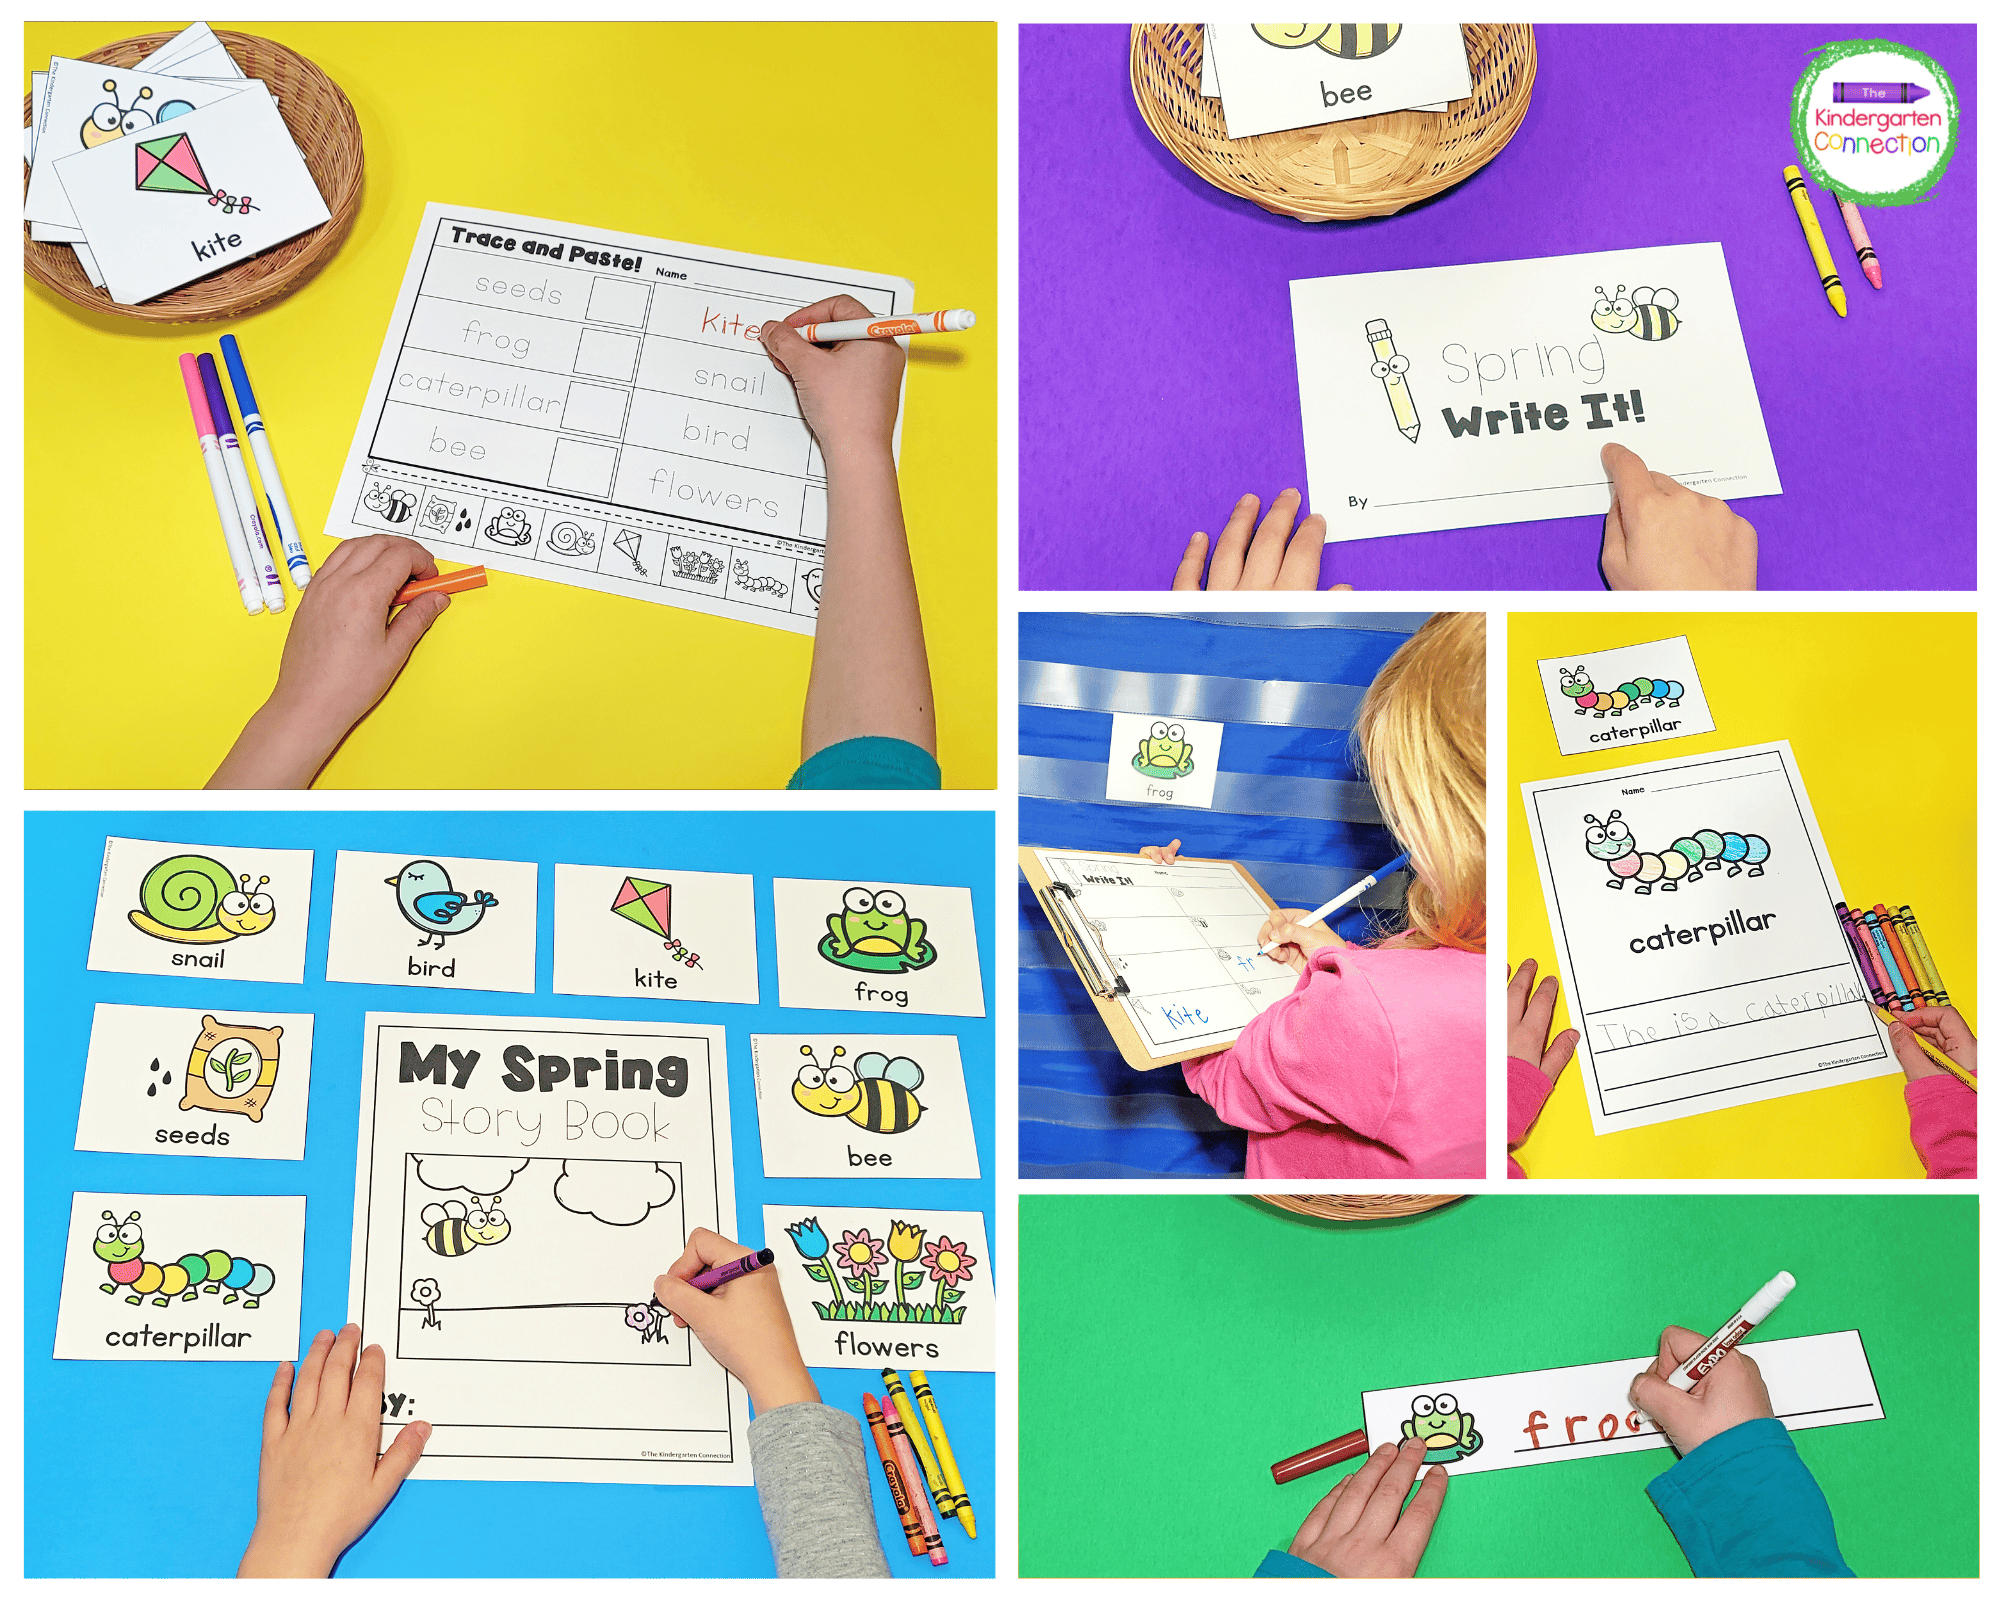 These spring writing activities are hands-on, fun, and engaging!